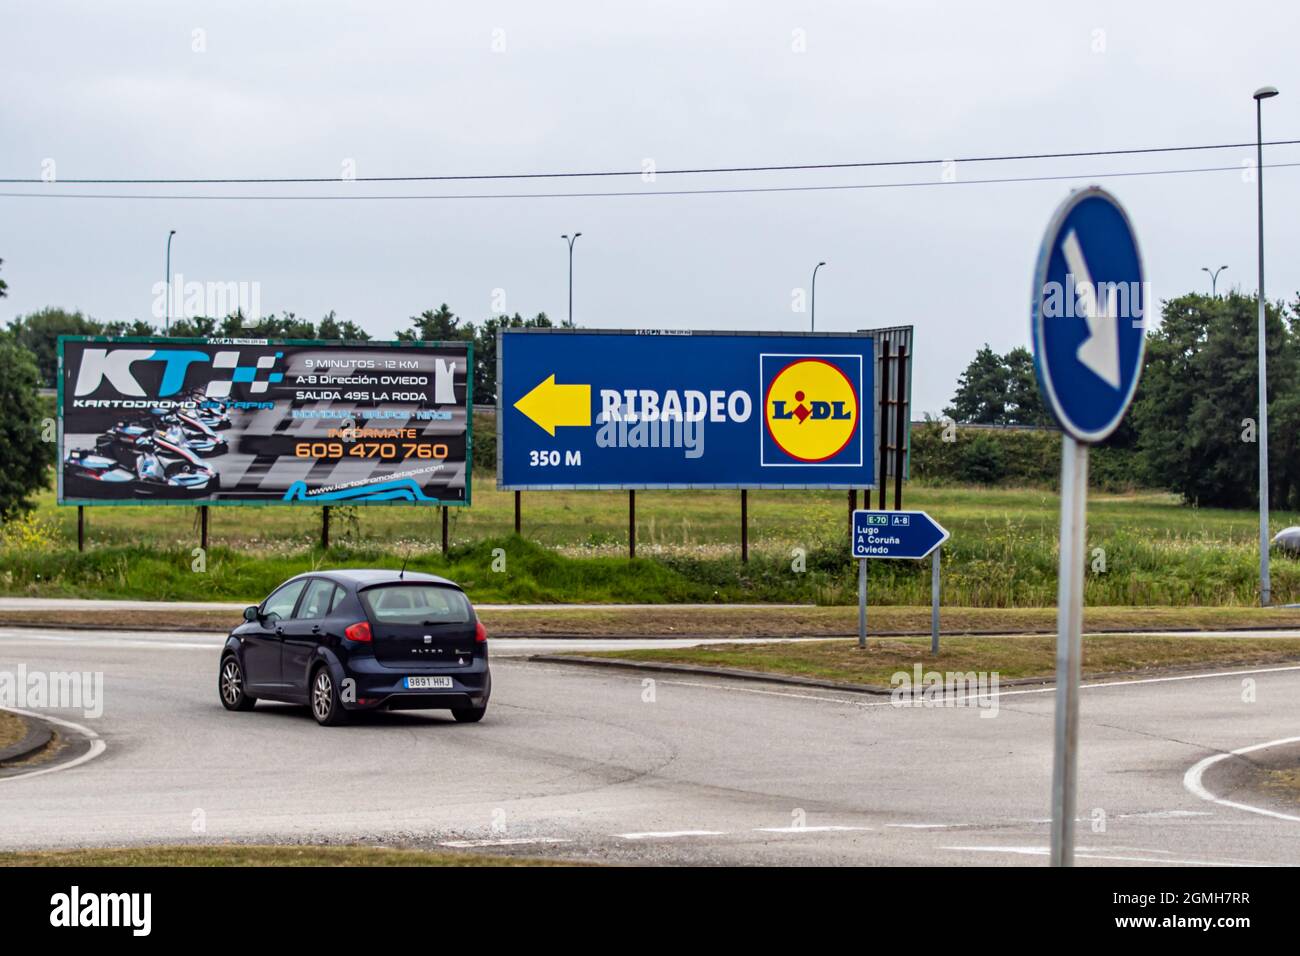 RIBADEO, SPAIN - Aug 31, 2021: a signage of LIDL brand shop on blue  billboard on lawn by road in Ribadeo, Spain Stock Photo - Alamy